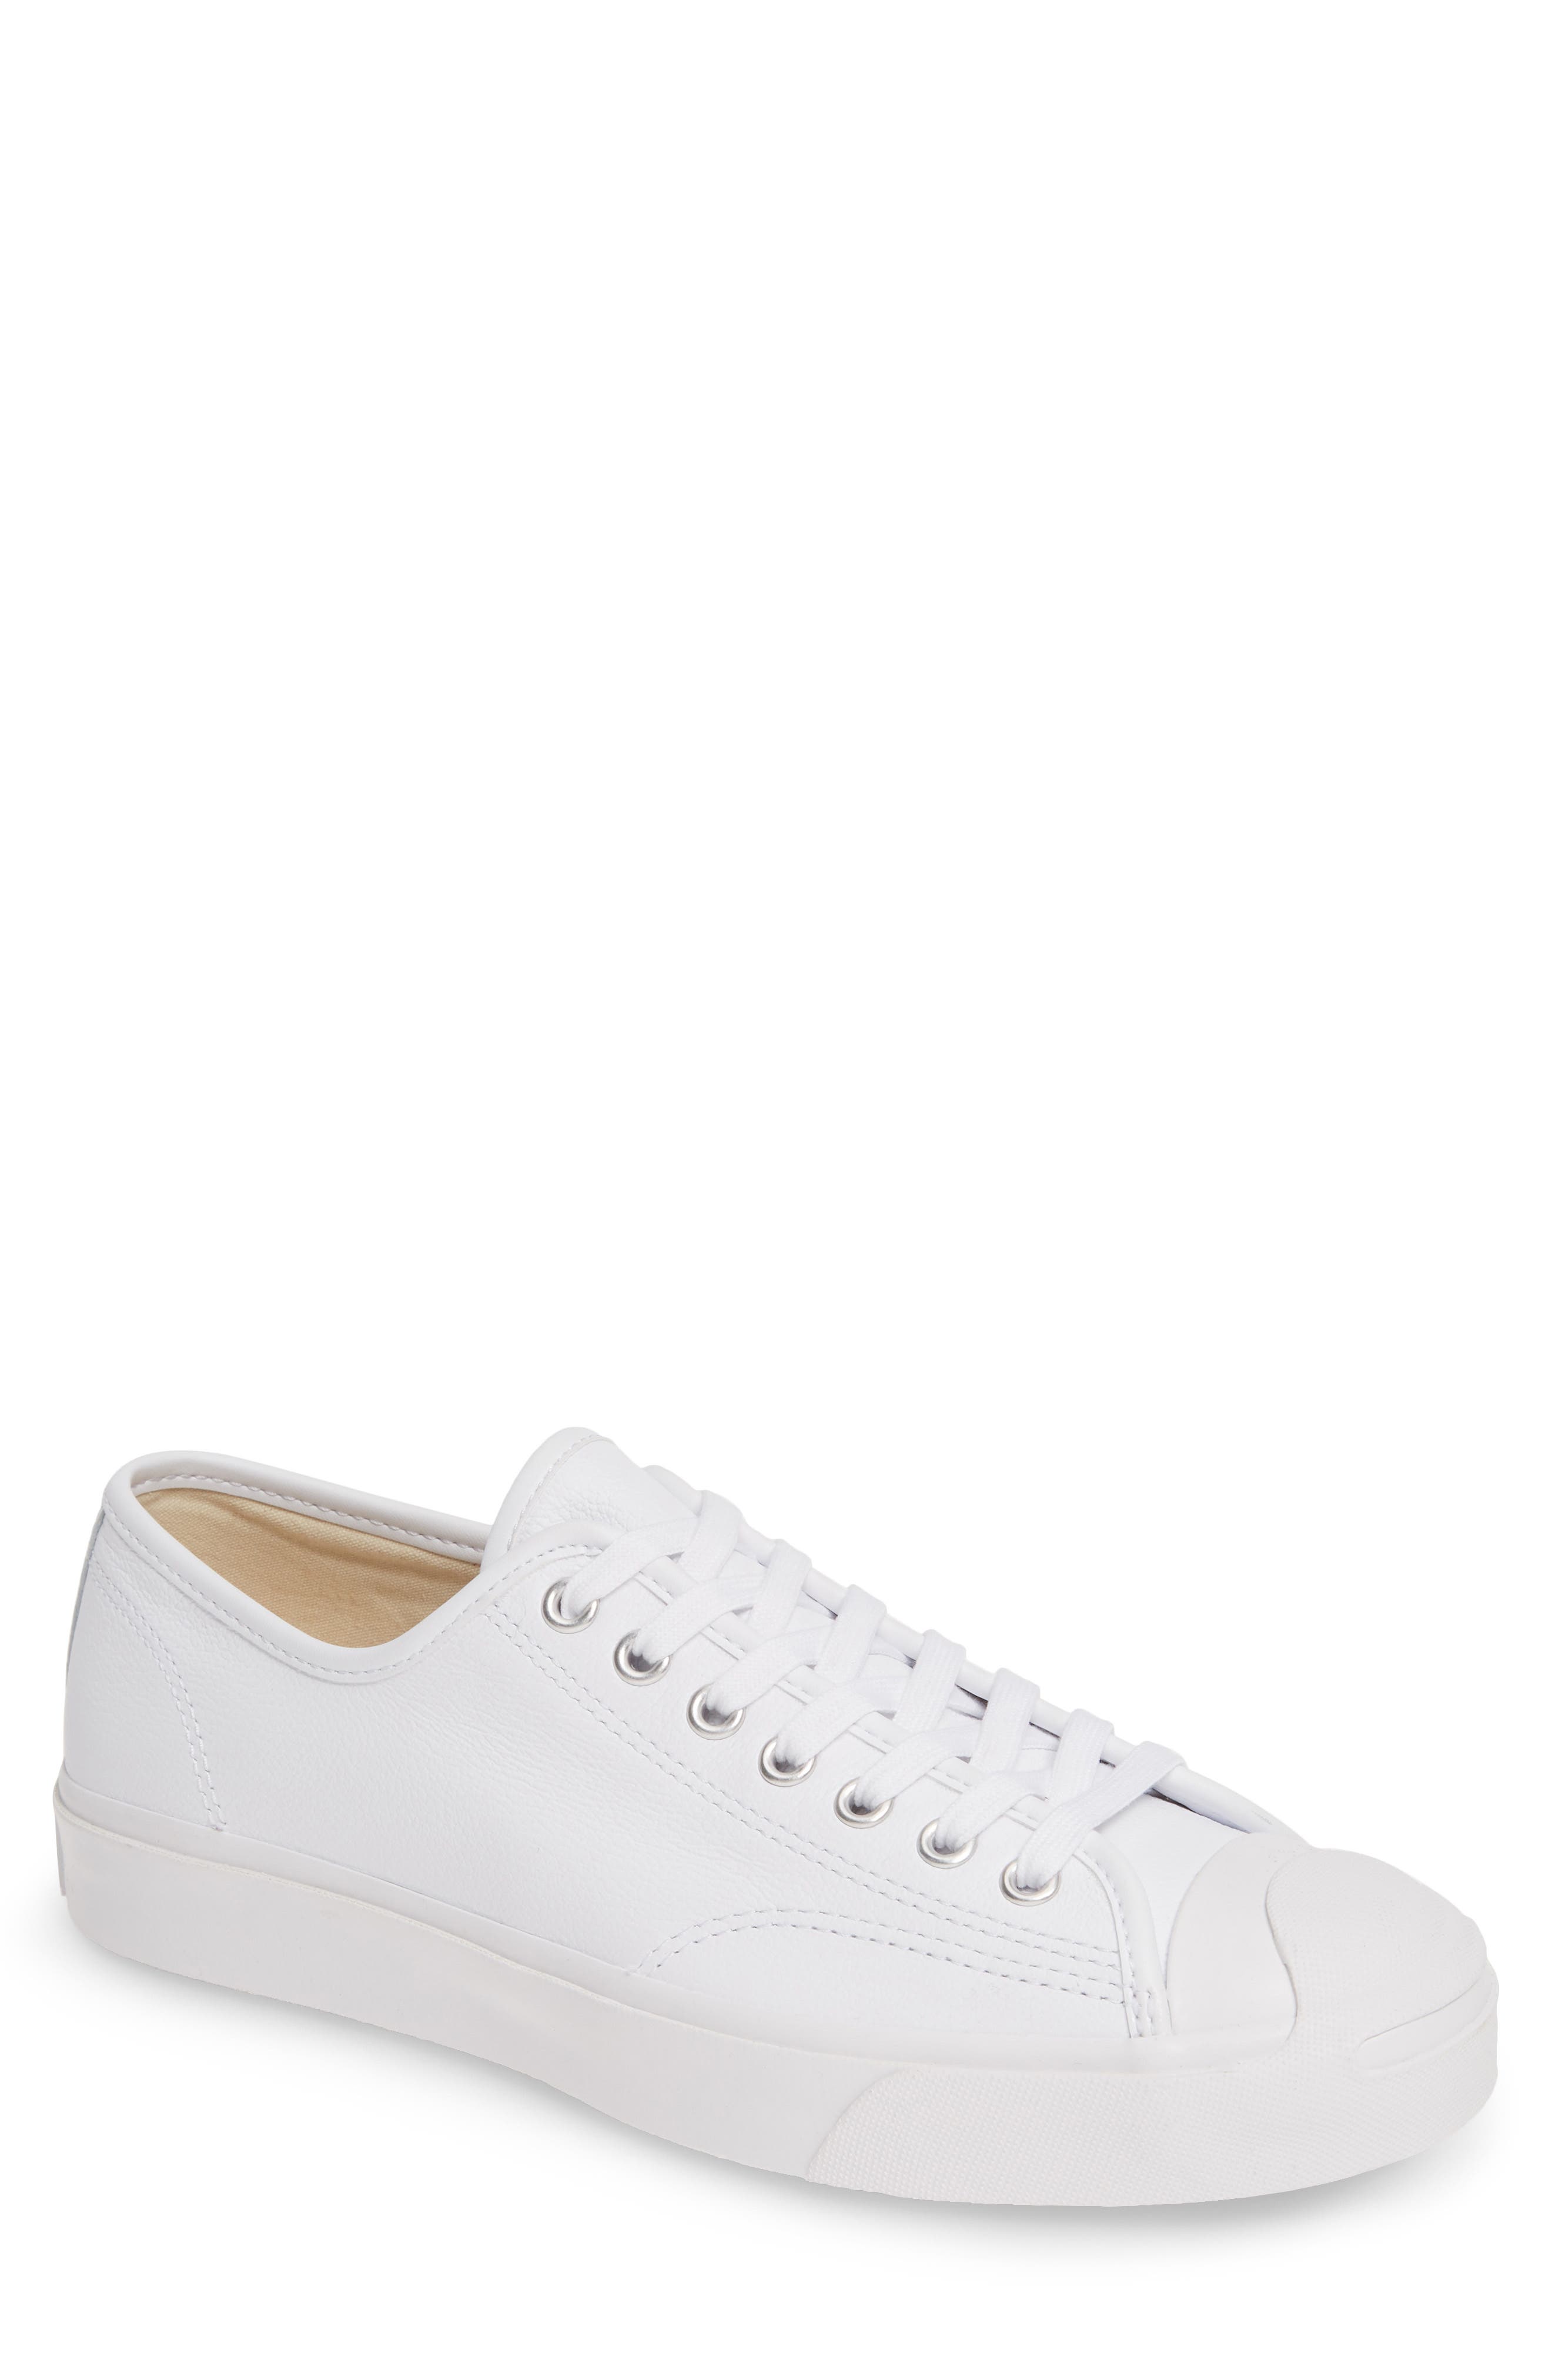 white low top converse mens